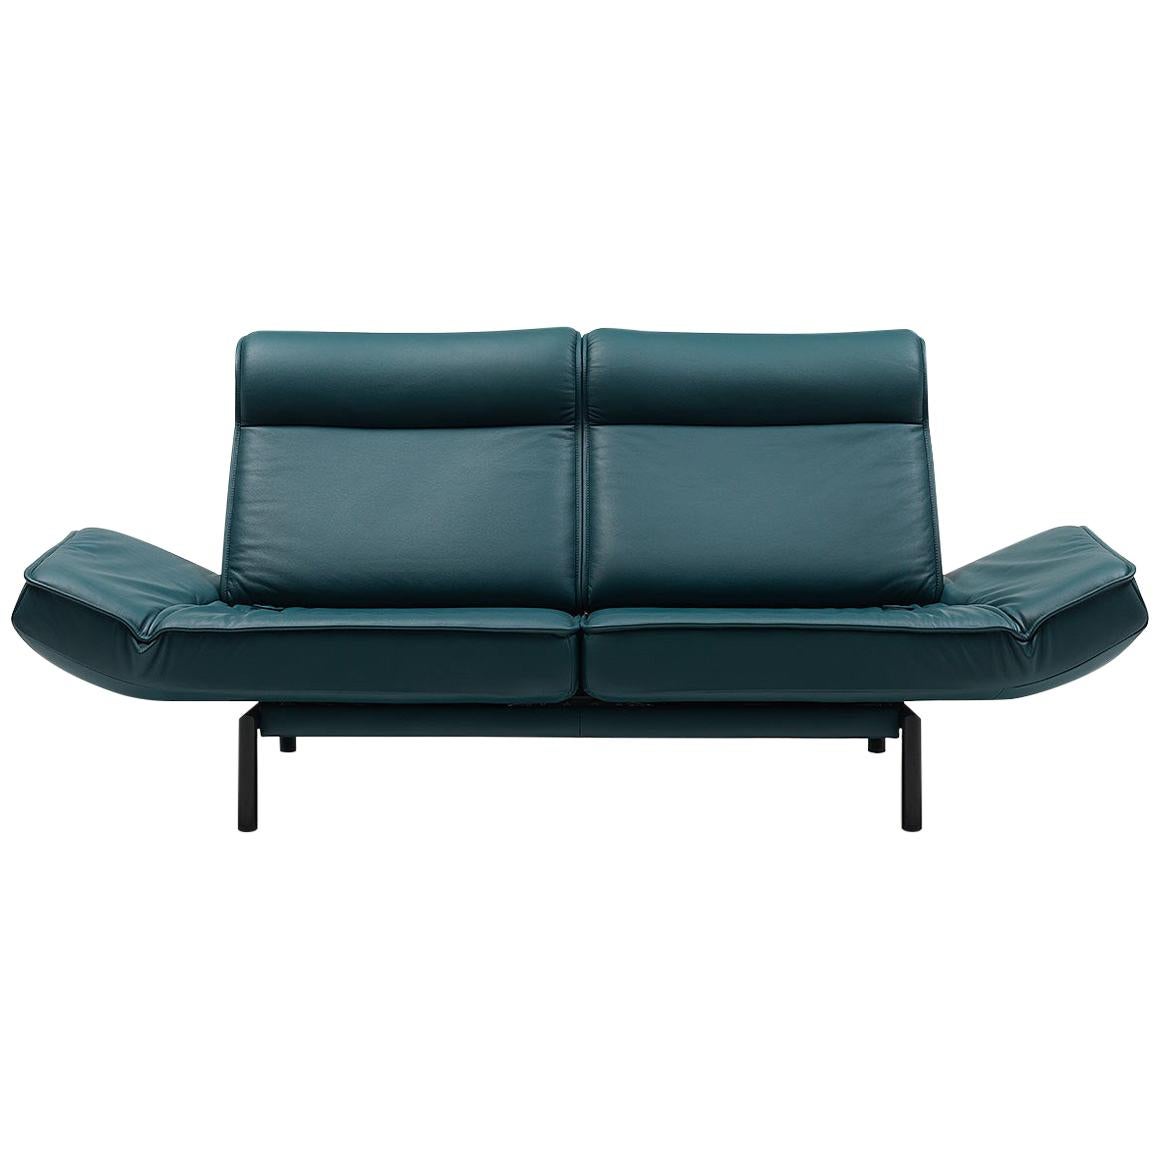 De Sede DS-450/02 Sofa in Petrol Upholstery by Thomas Althaus